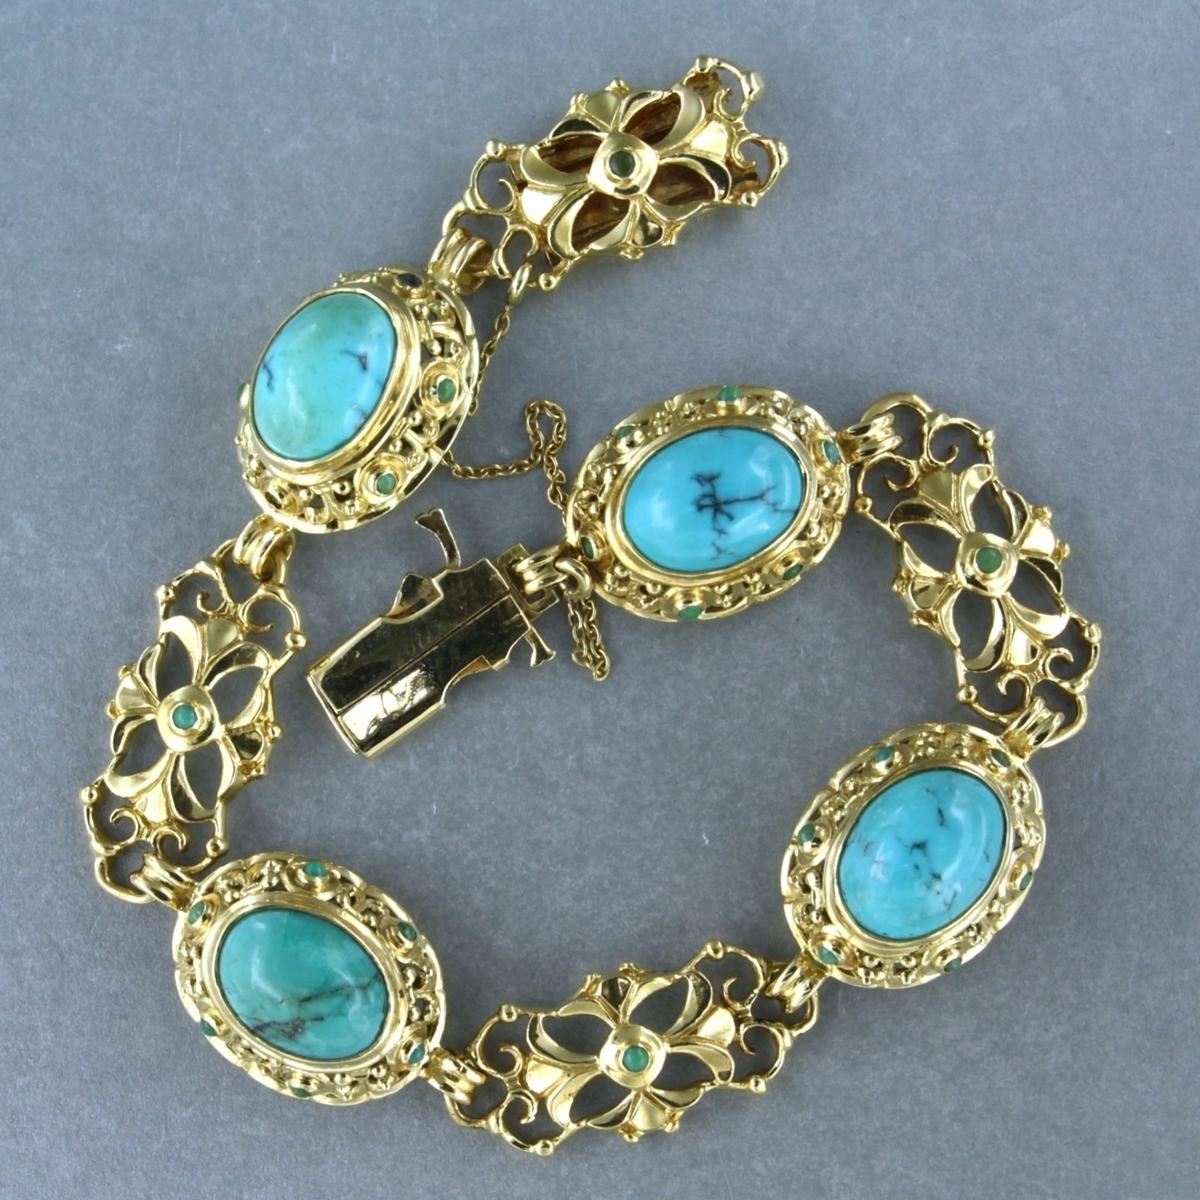 18k yellow gold bracelet set with turquoise - 18 cm long In Excellent Condition For Sale In The Hague, ZH